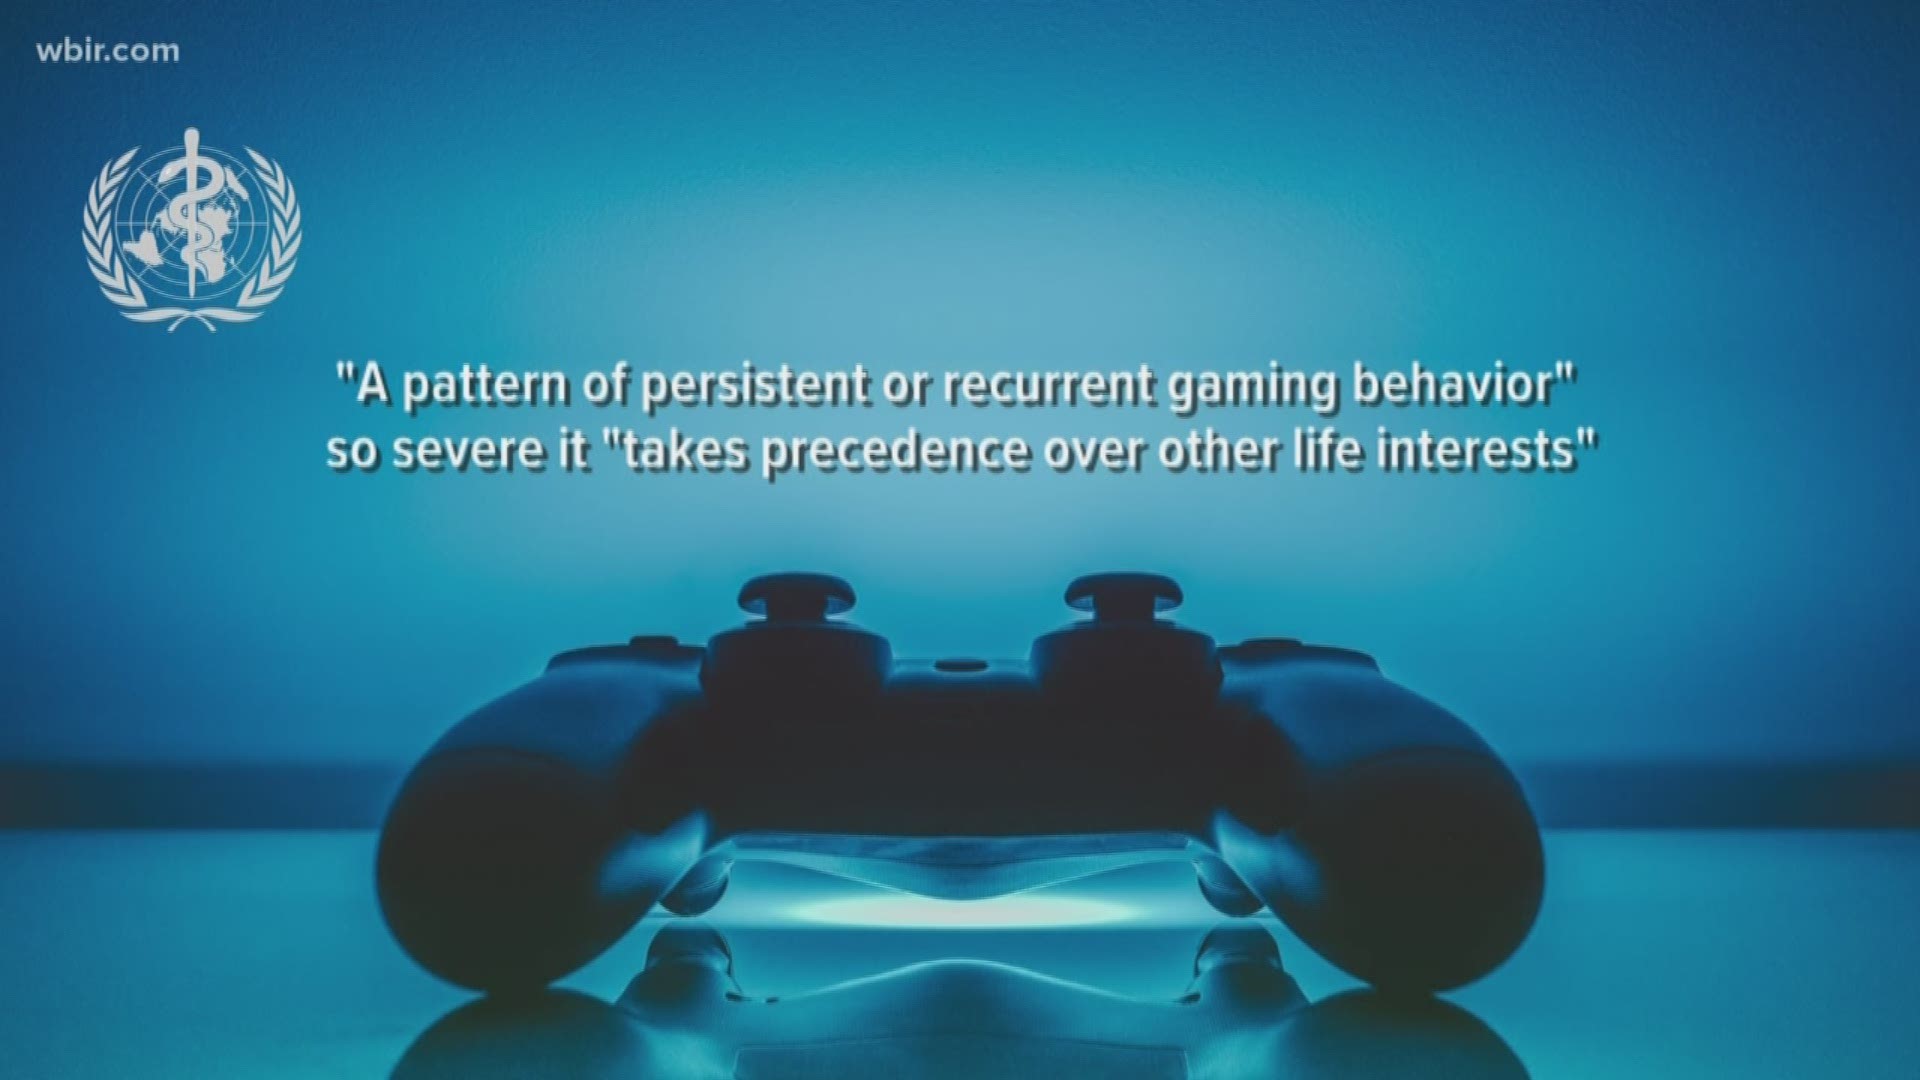 "Gaming disorder" is now classified as a medical addiction according to the World Health Organization.